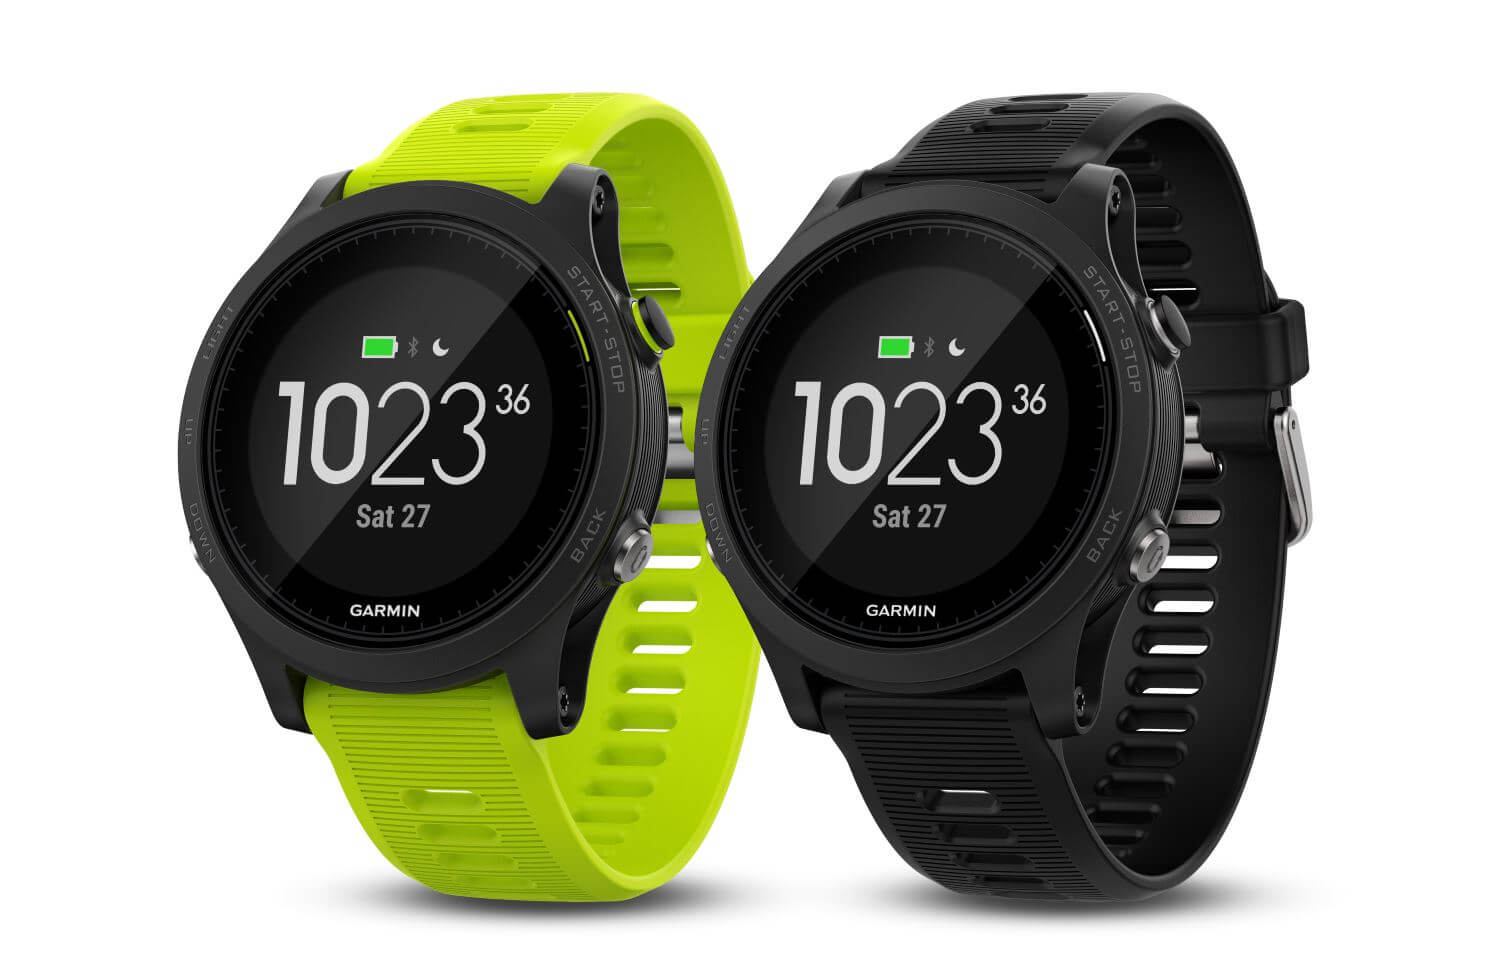 Latest Beta Update Brings New Features to the Garmin Forerunner